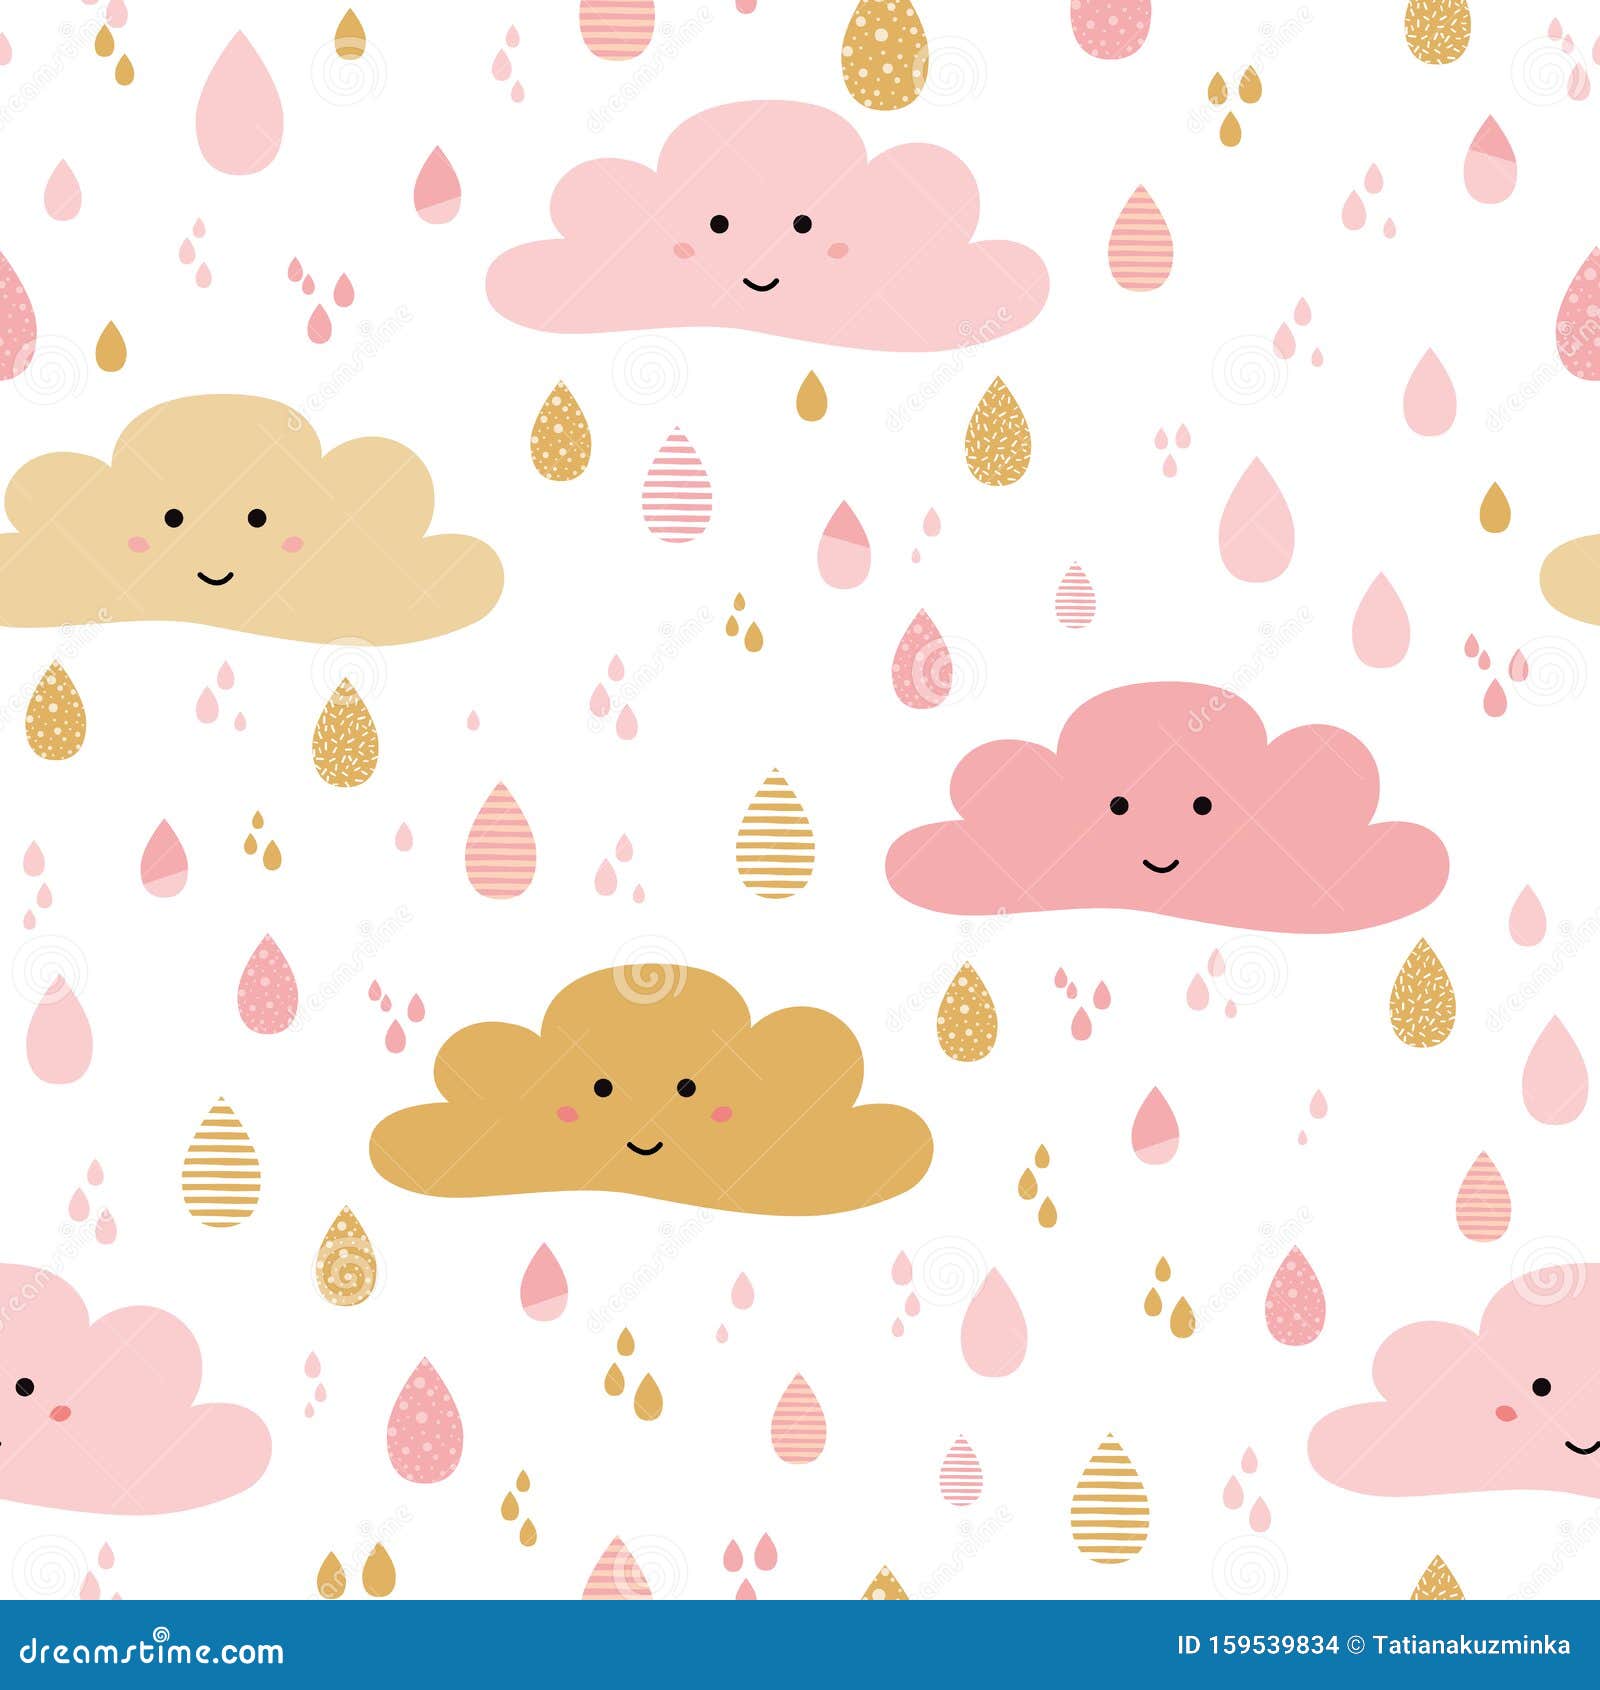 Cute Pink Seamless Pattern Background Smile Clouds Rainy Drops